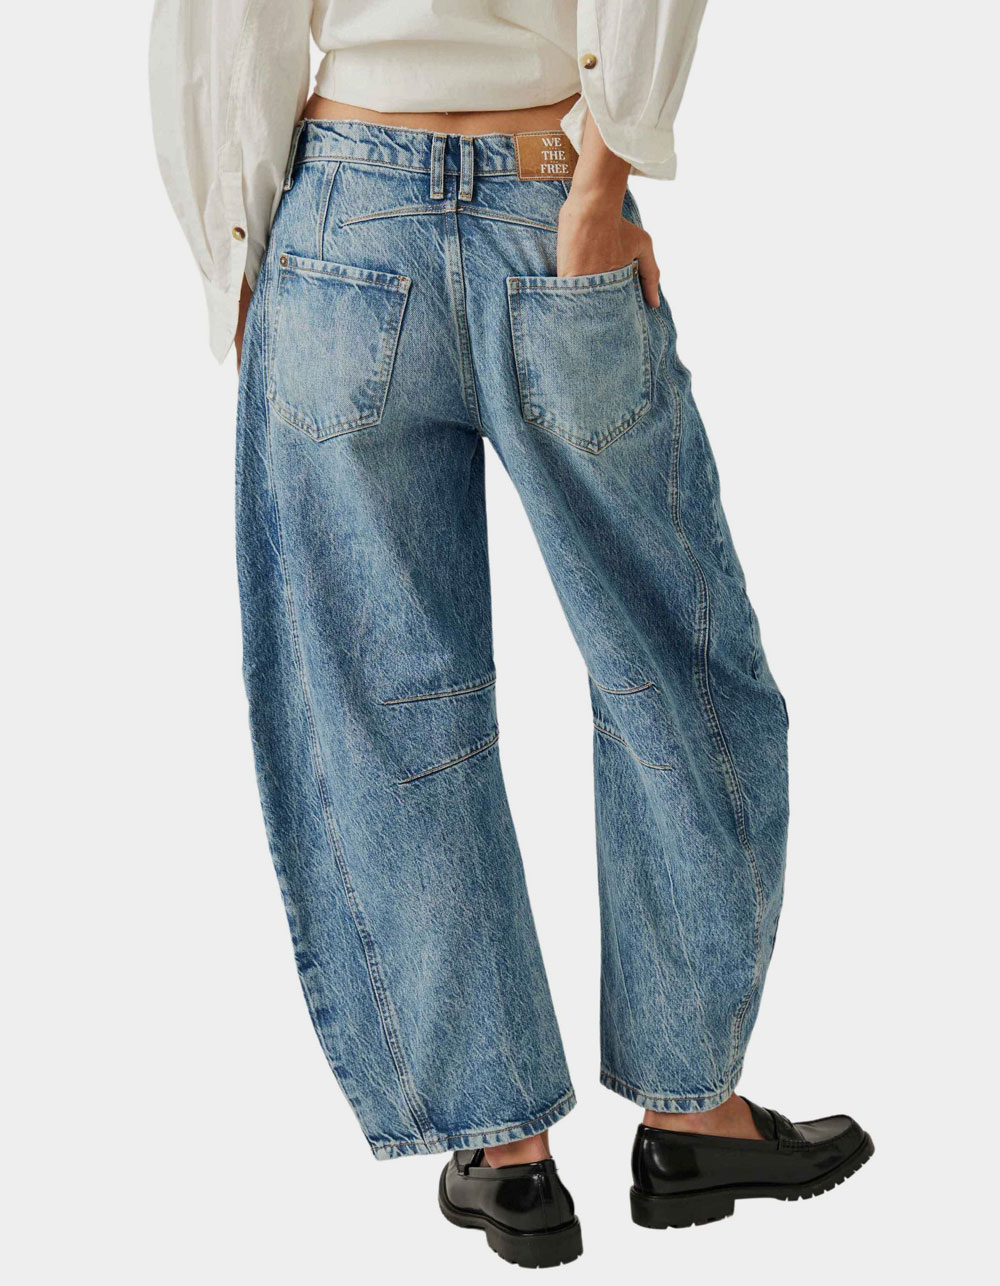 FREE PEOPLE Good Luck Mid Rise Barrel Womens Jeans - LIGHT WASH | Tillys